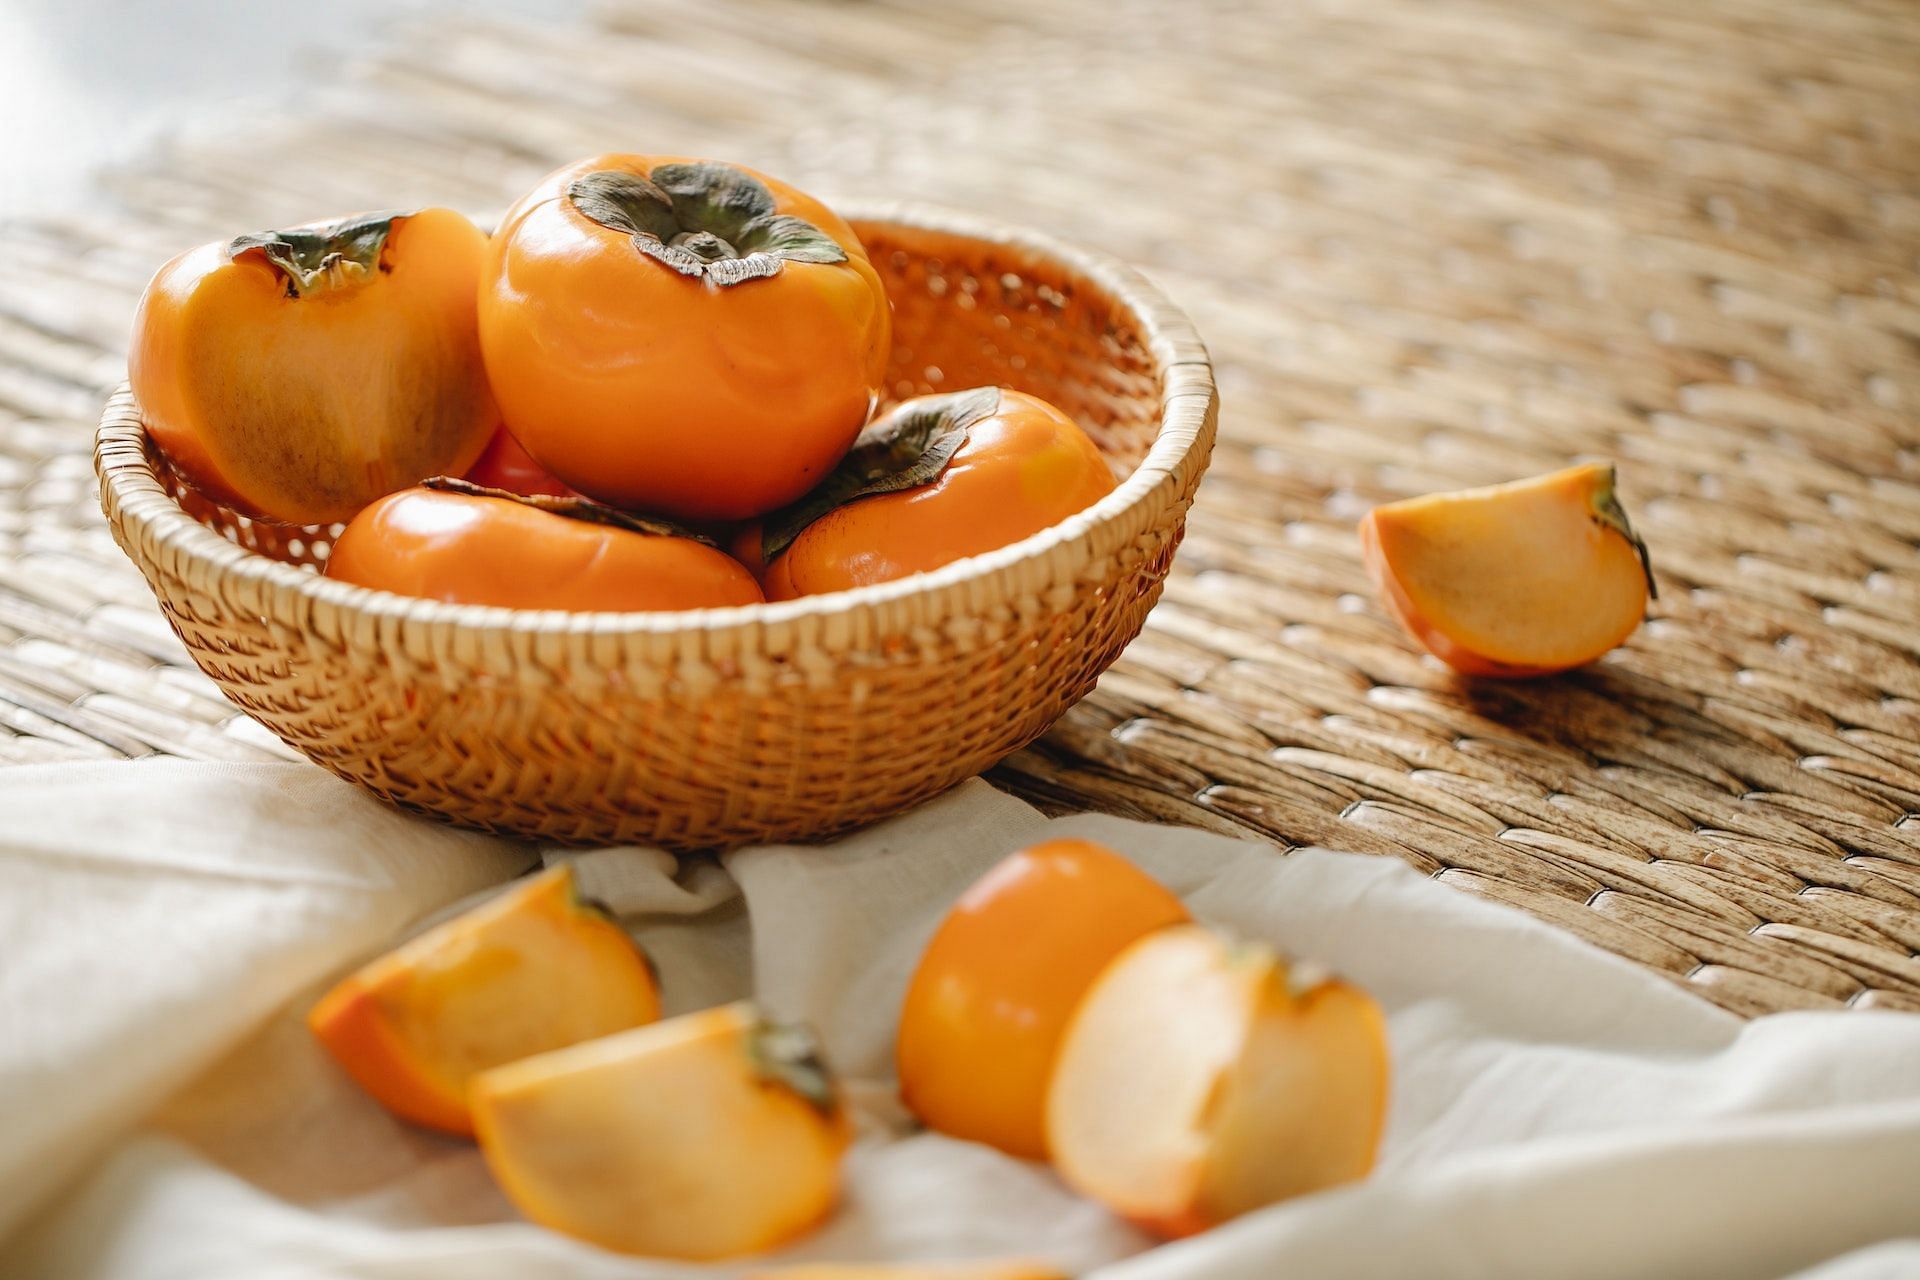 There are several benefits of persimmon to know about. (Photo via Pexels/Any Lane)